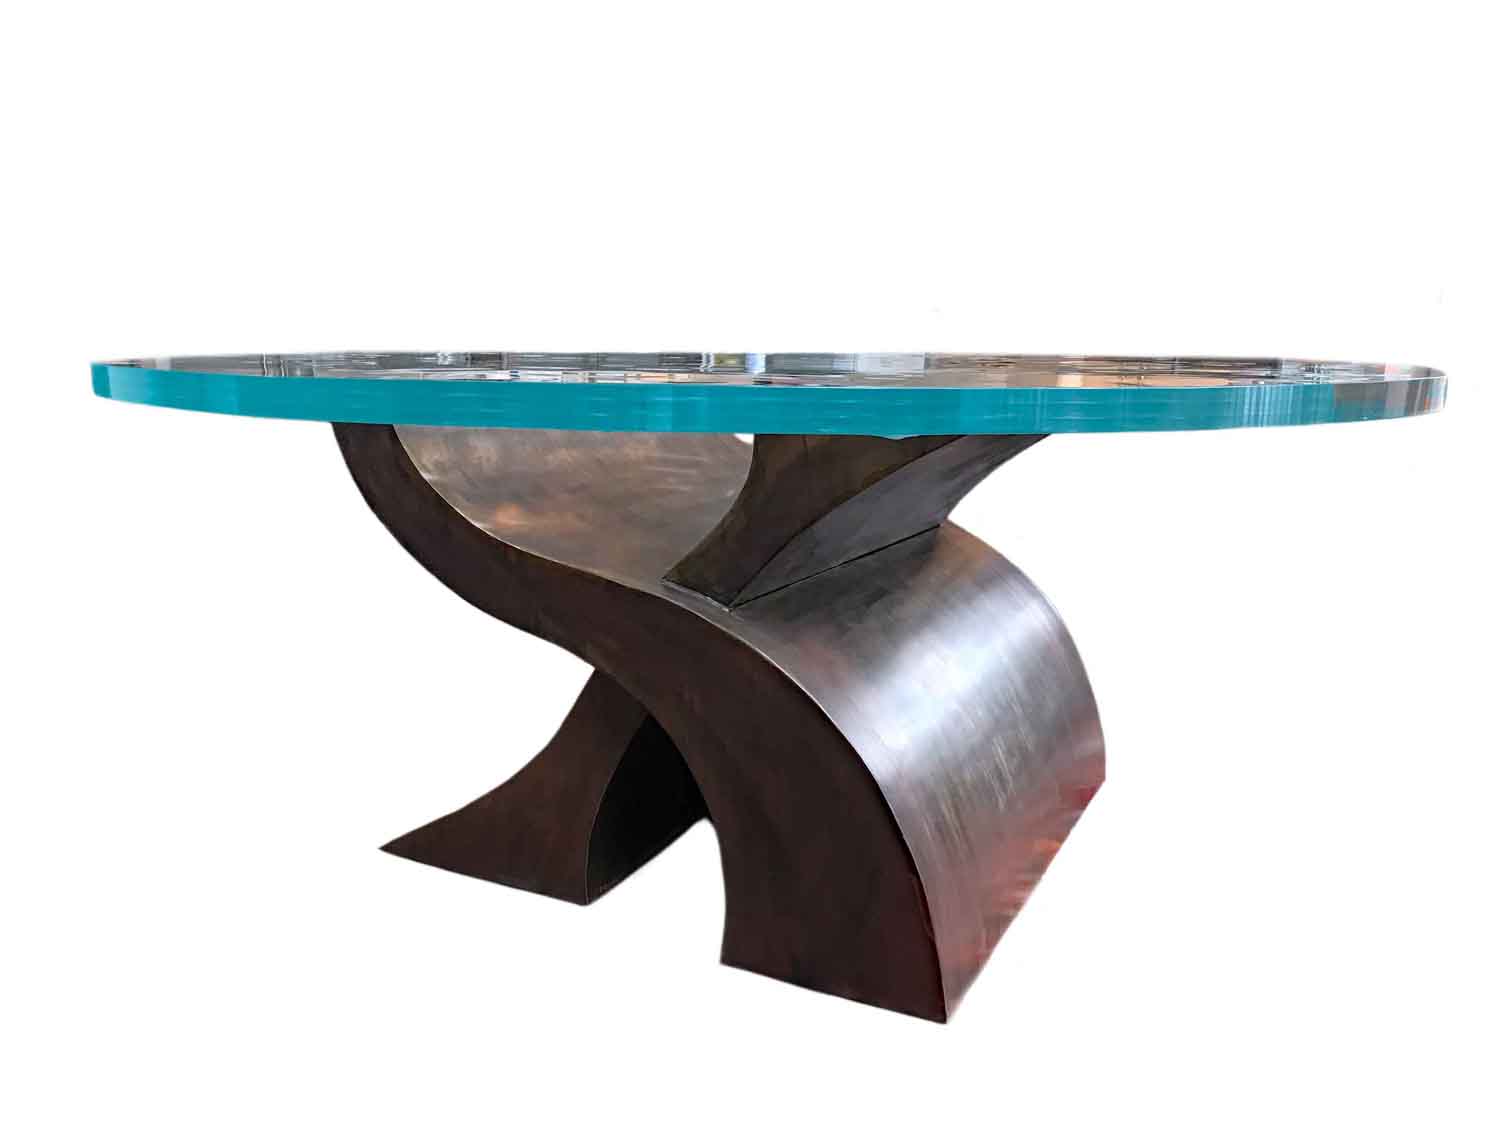 2019/11/Custom-Round-Metal-and-Glass-DIning-Table-Metal-table-Base.jpg